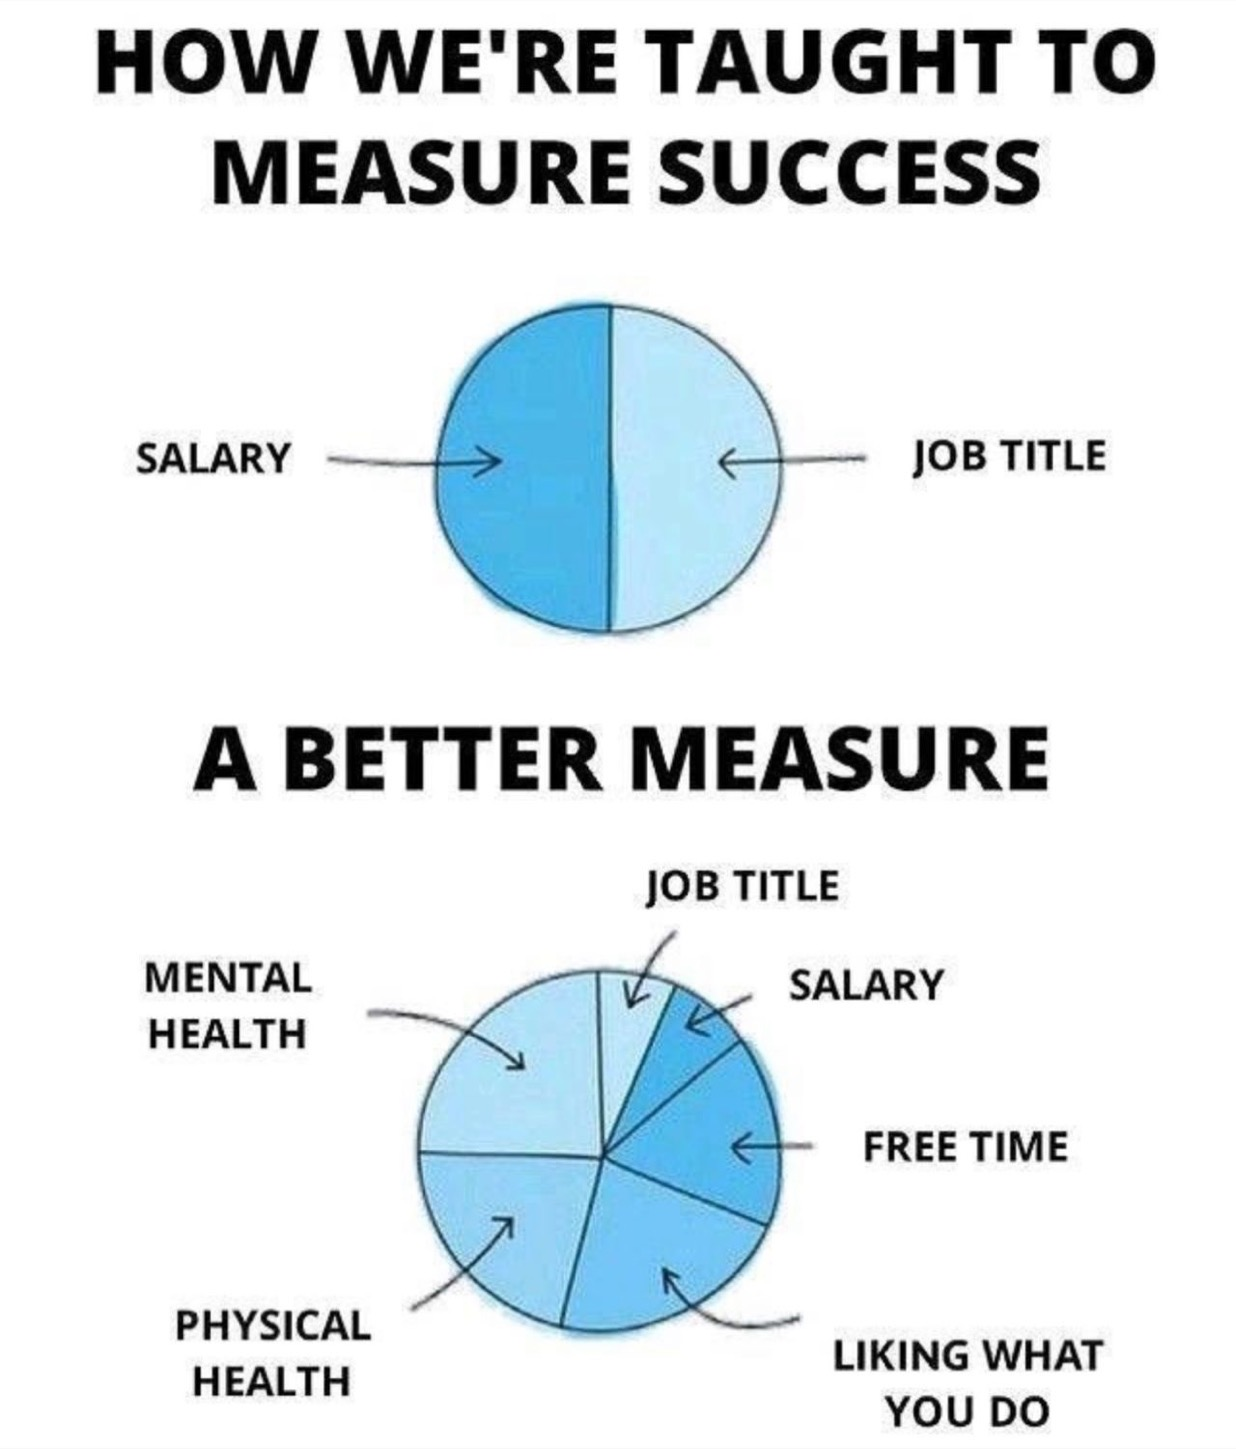 measuring success the right way